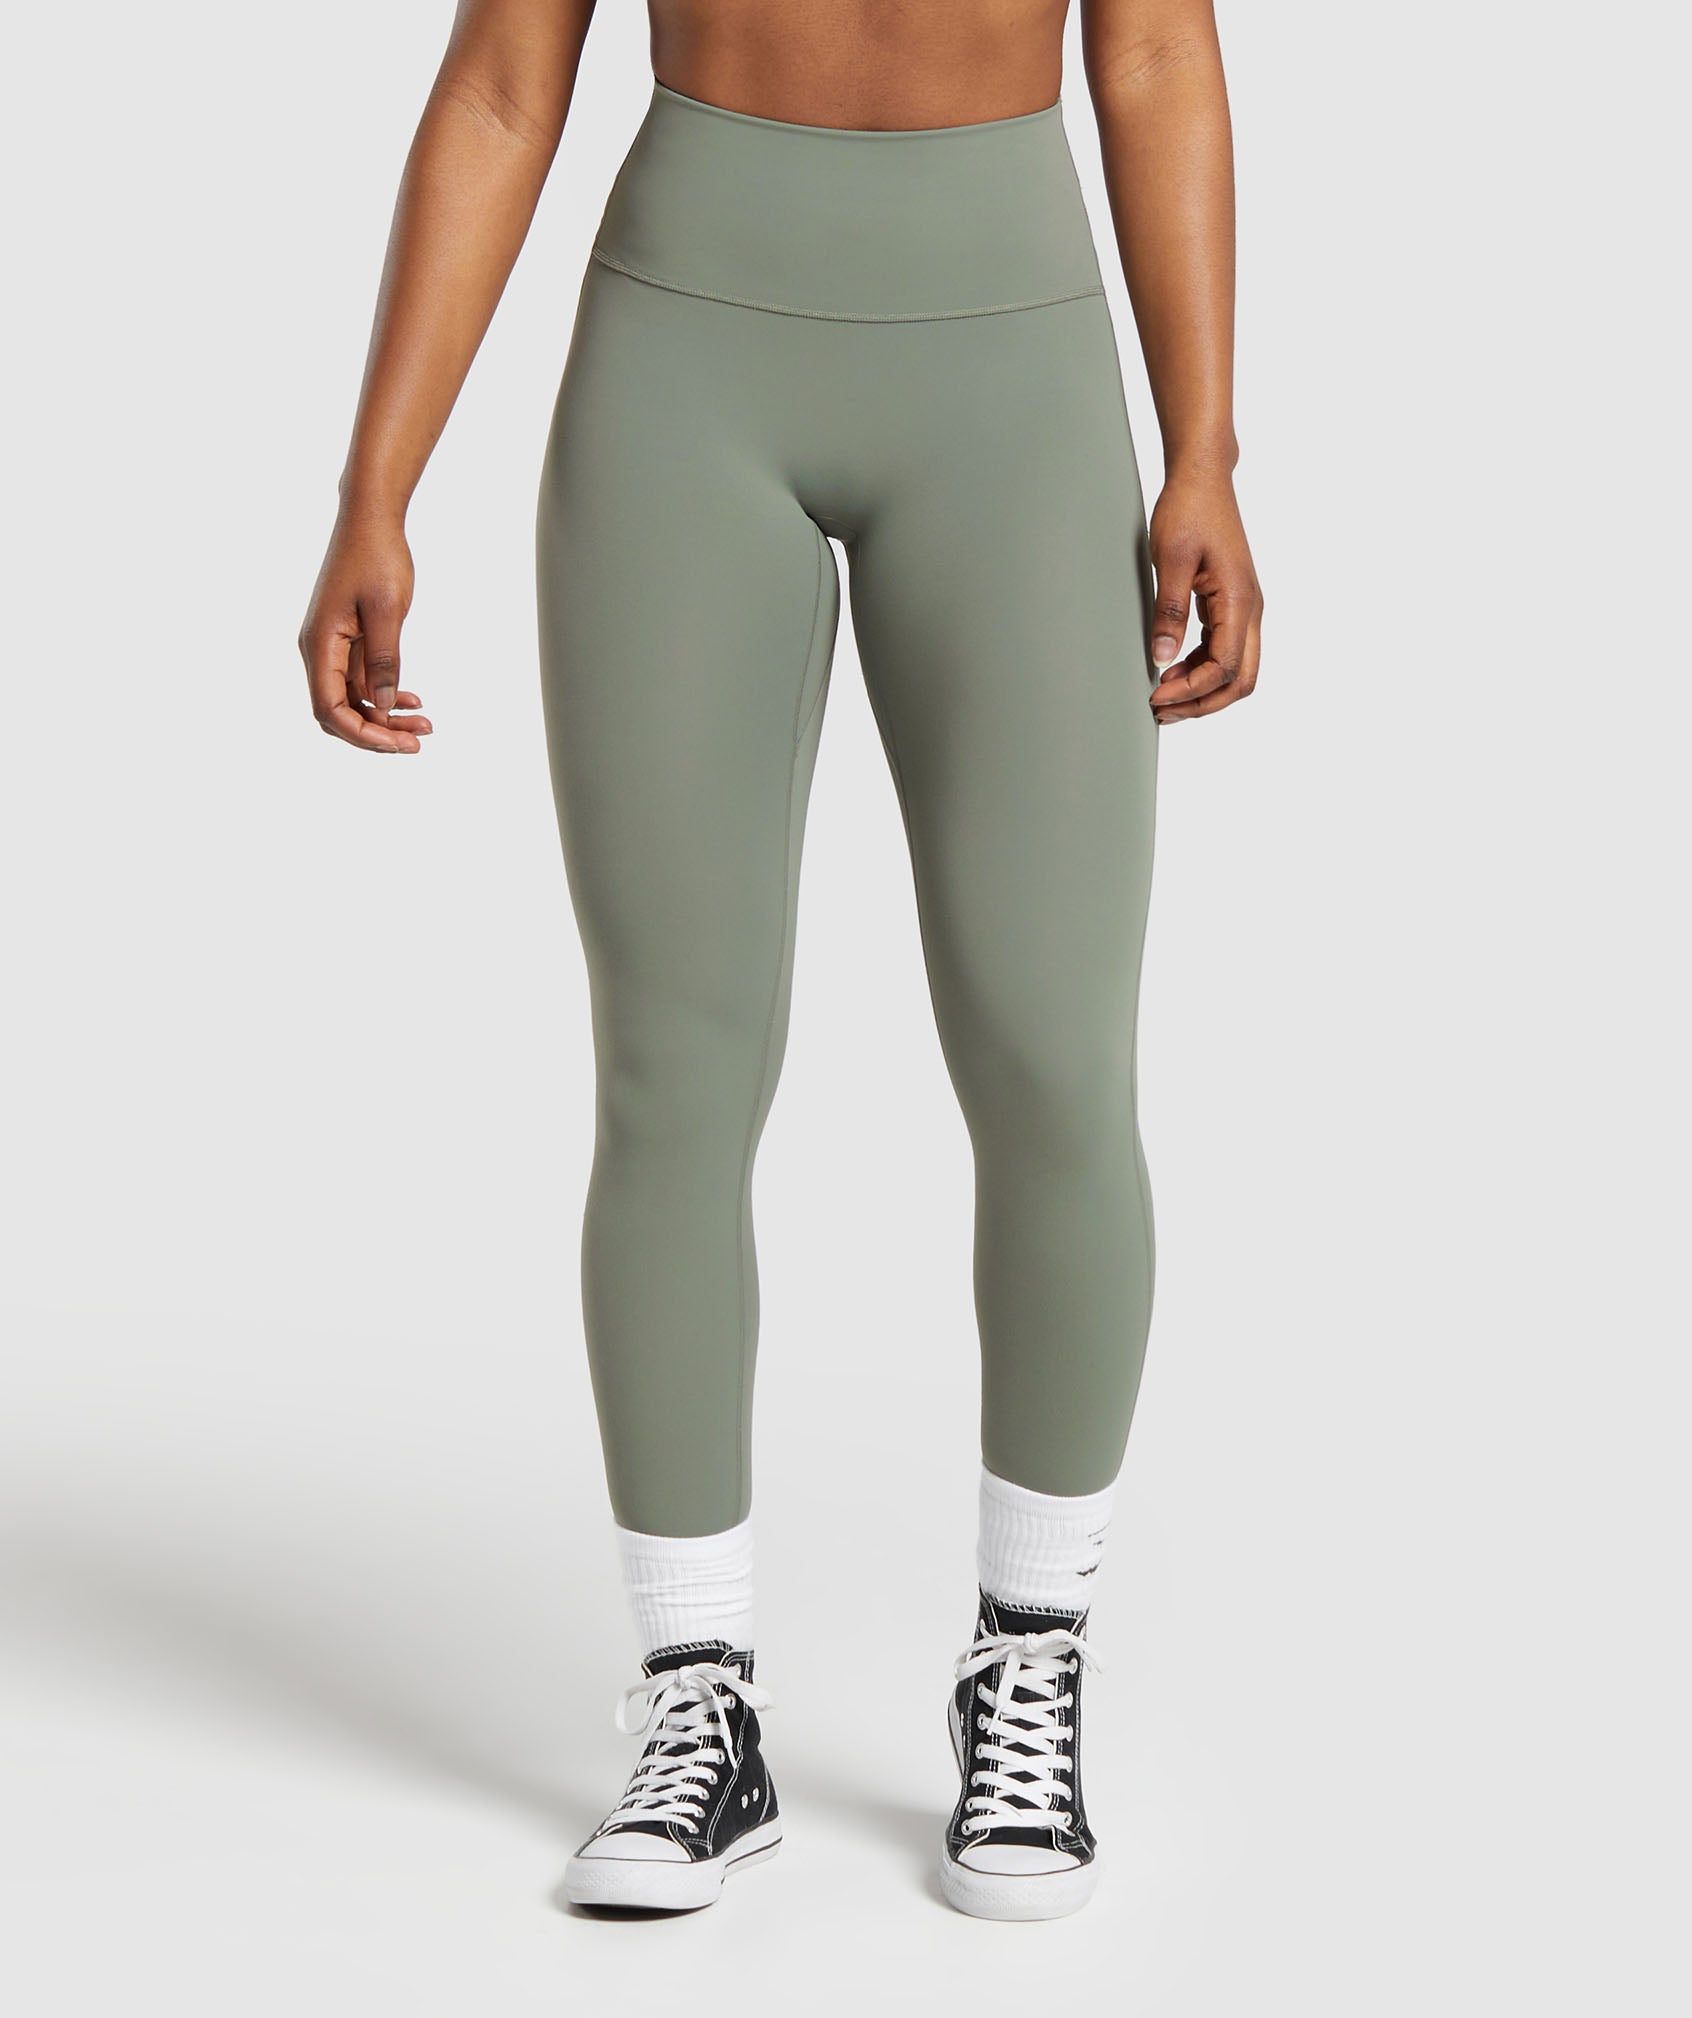 Legacy Tall Leggings in Unit Green - view 1